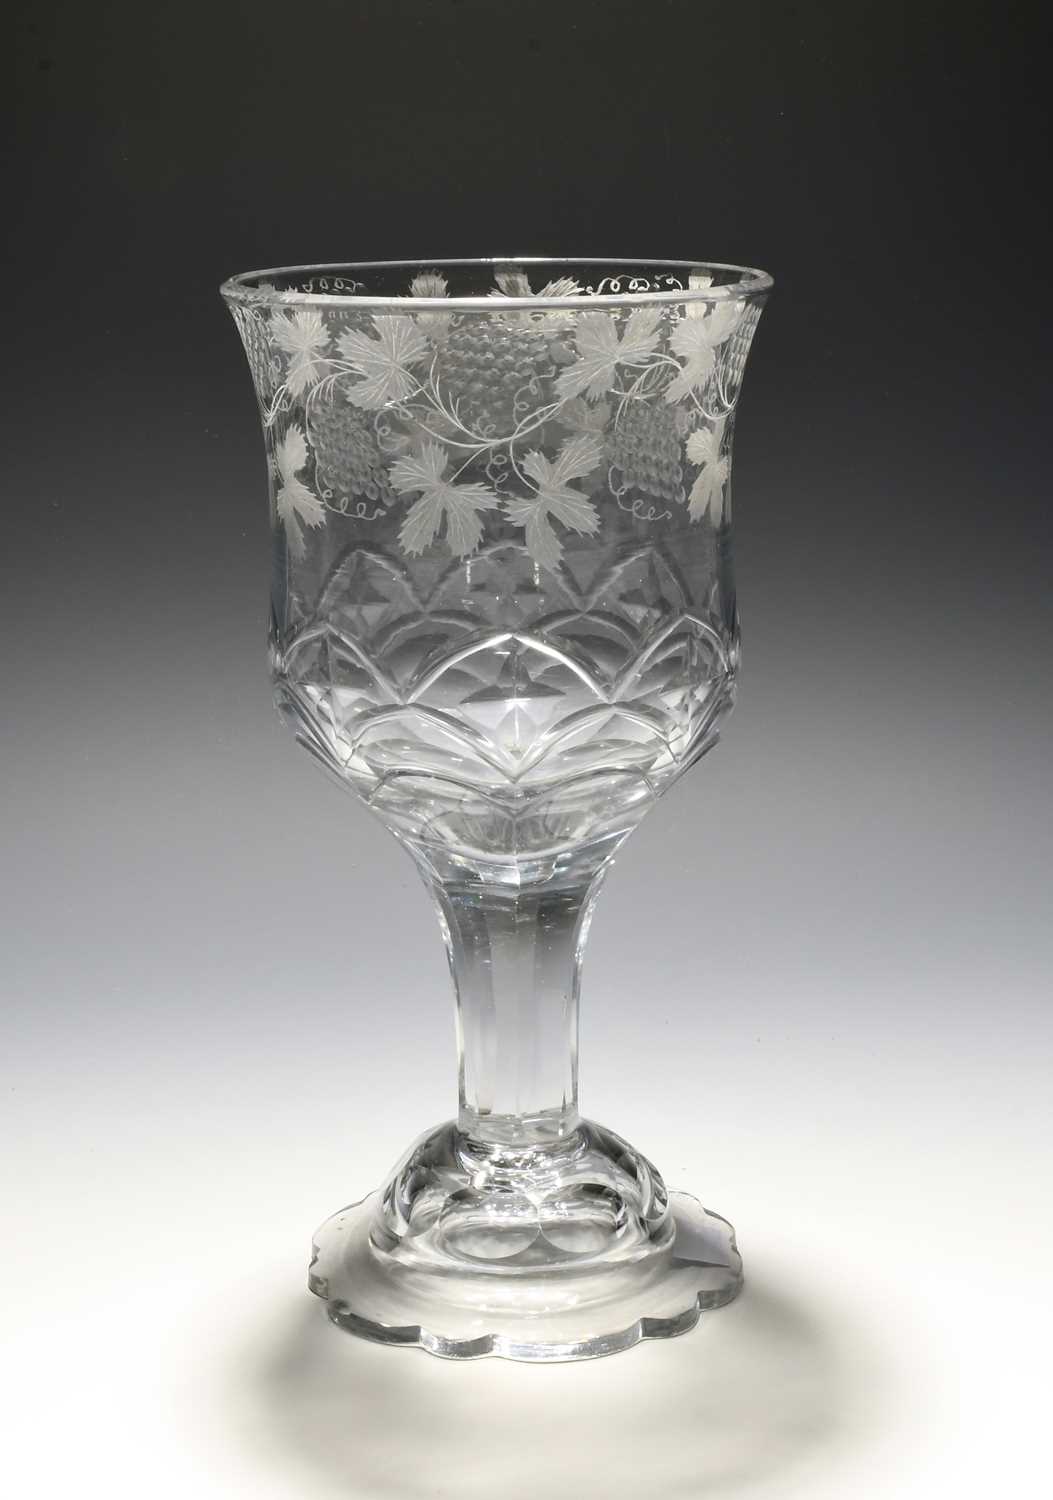 A large engraved glass goblet, c.1770-80, the slightly waisted bowl engraved with a continuous